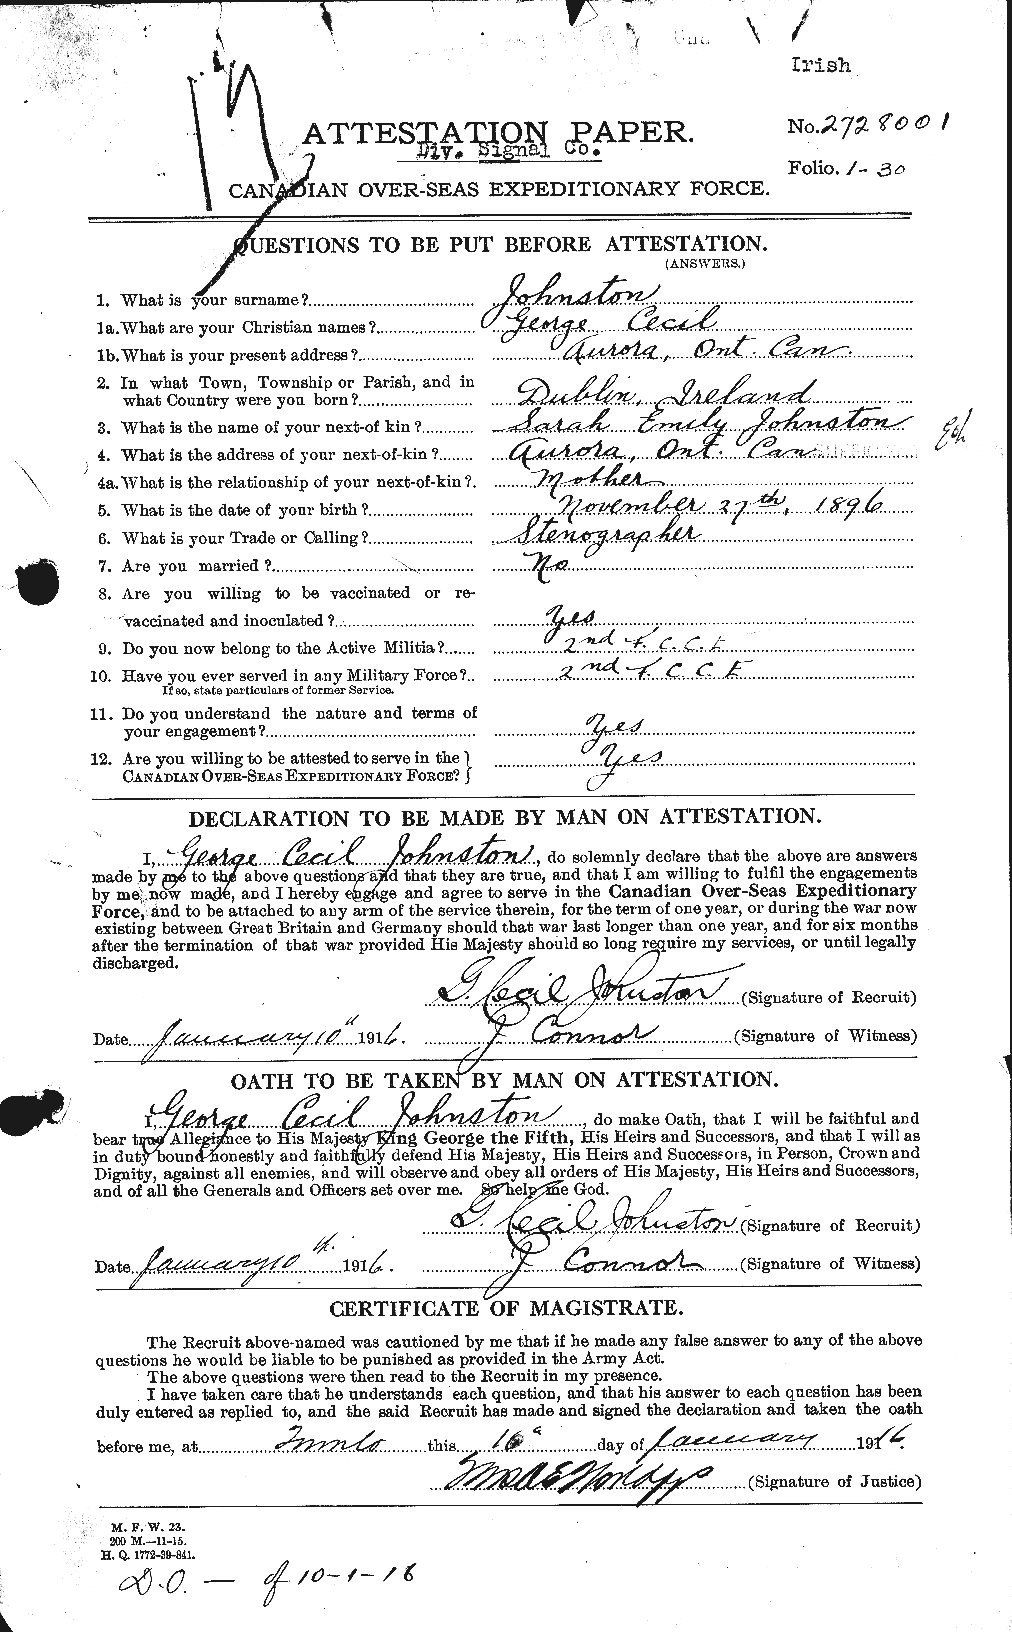 Personnel Records of the First World War - CEF 419412a